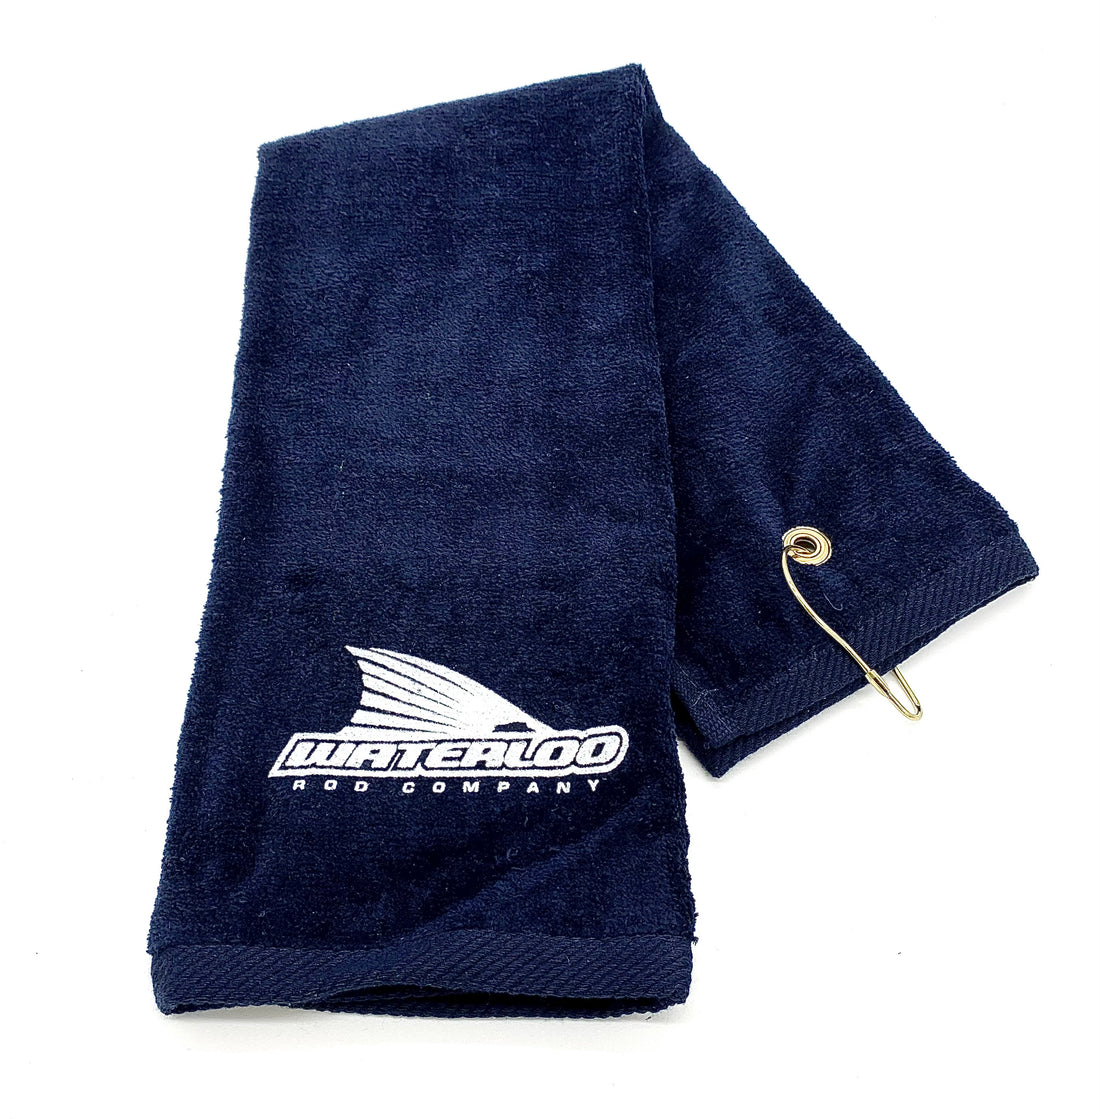 Waterloo Fishing Towels - Tails Up Logo